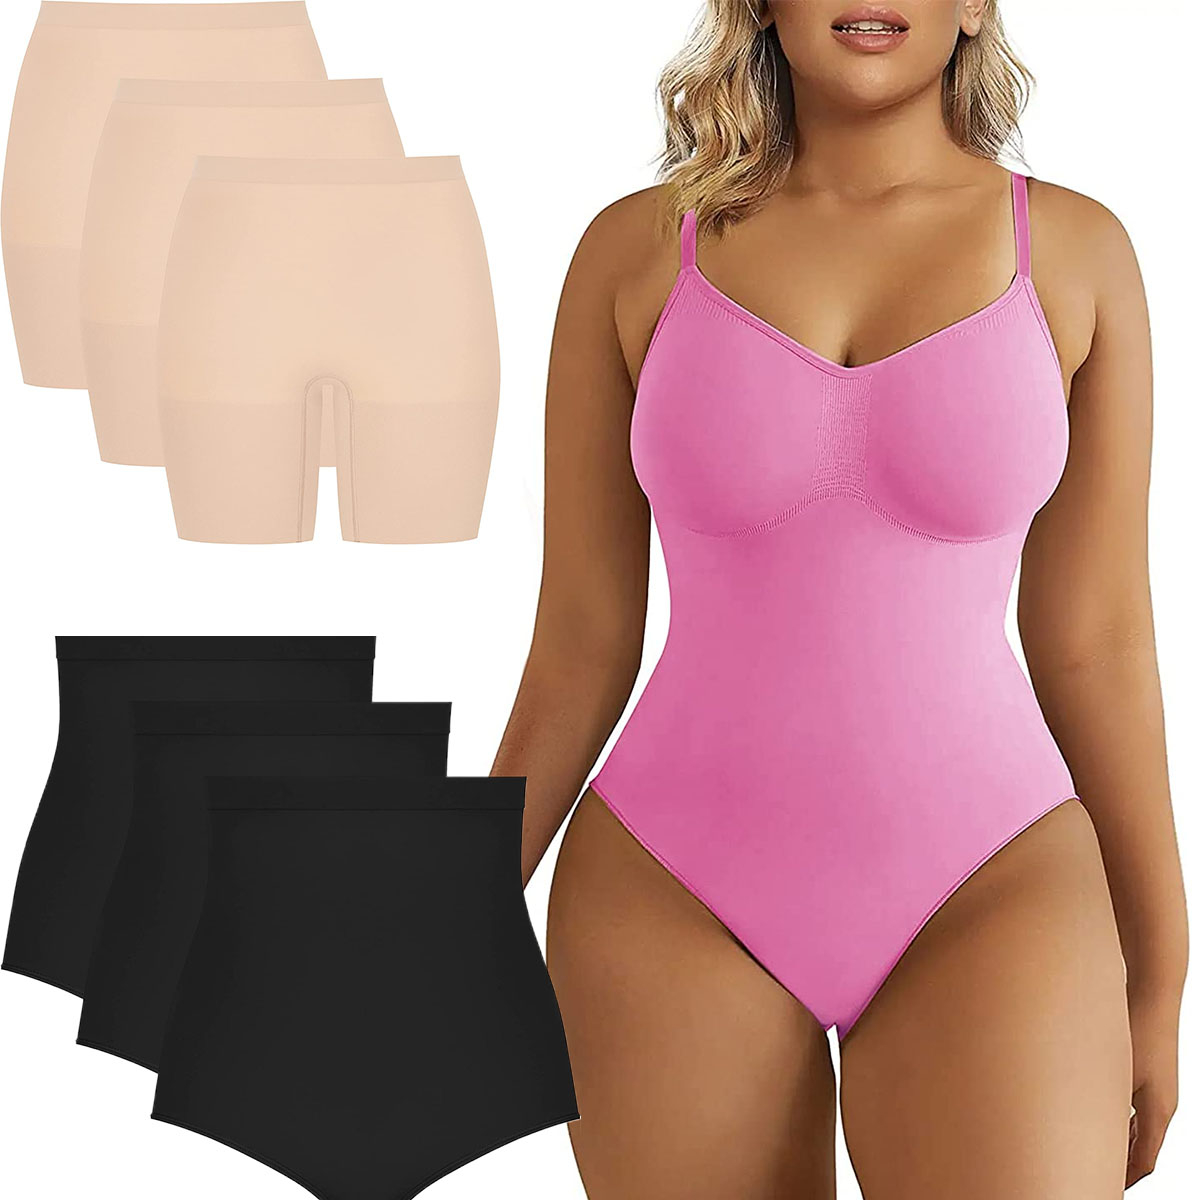 SKIMS - Maternity shapewear - provides support that keeps you comfortable  all day long. Shop SKIMS Maternity shapewear in 9 colors and in sizes XXS -  5X